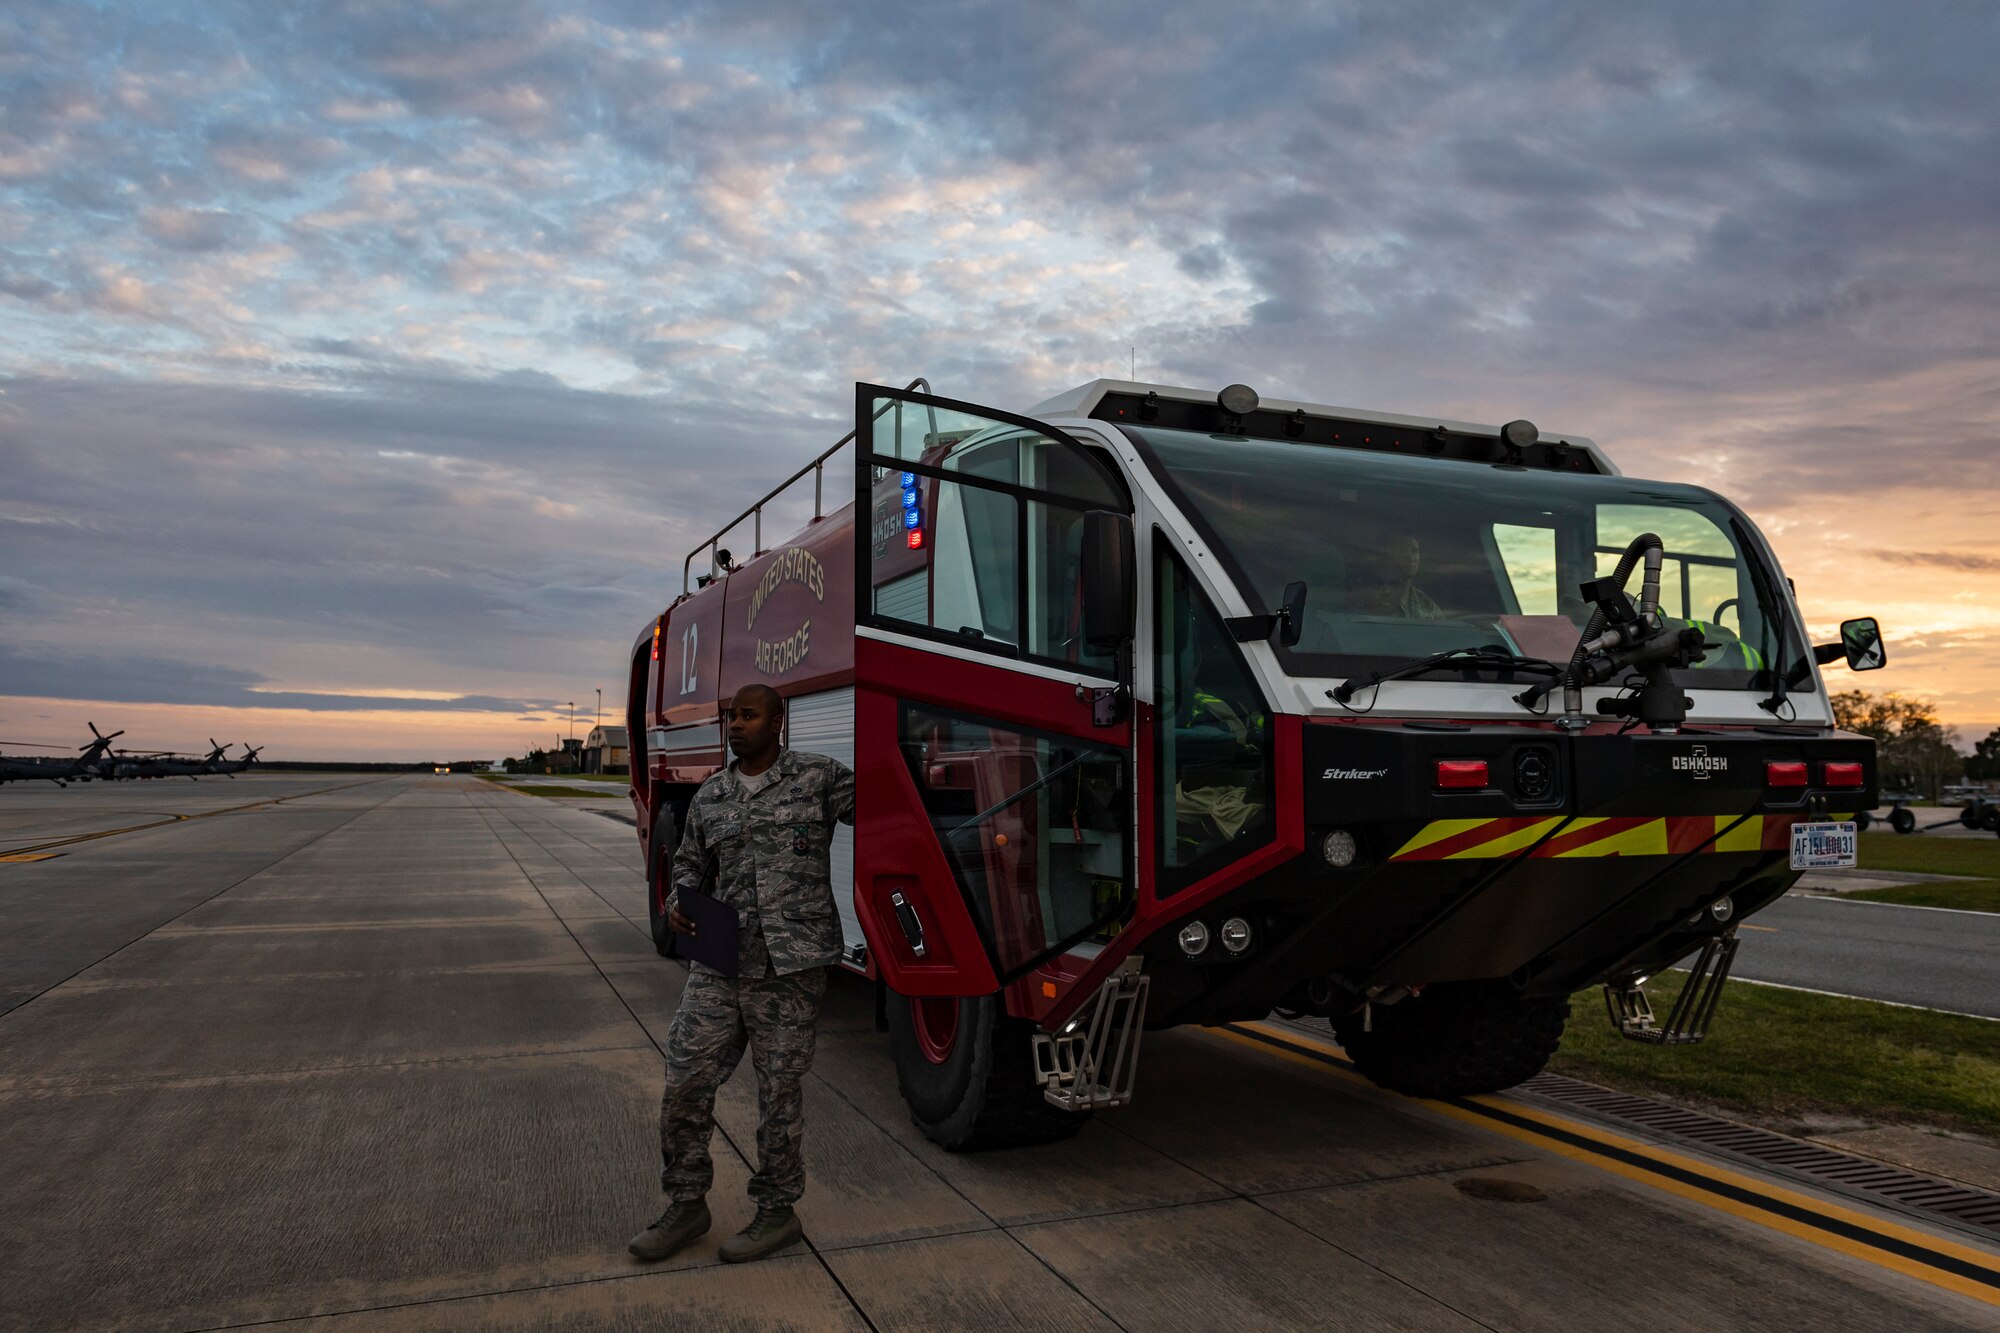 A photo of an Airman stepping out of a firefighting vehicle